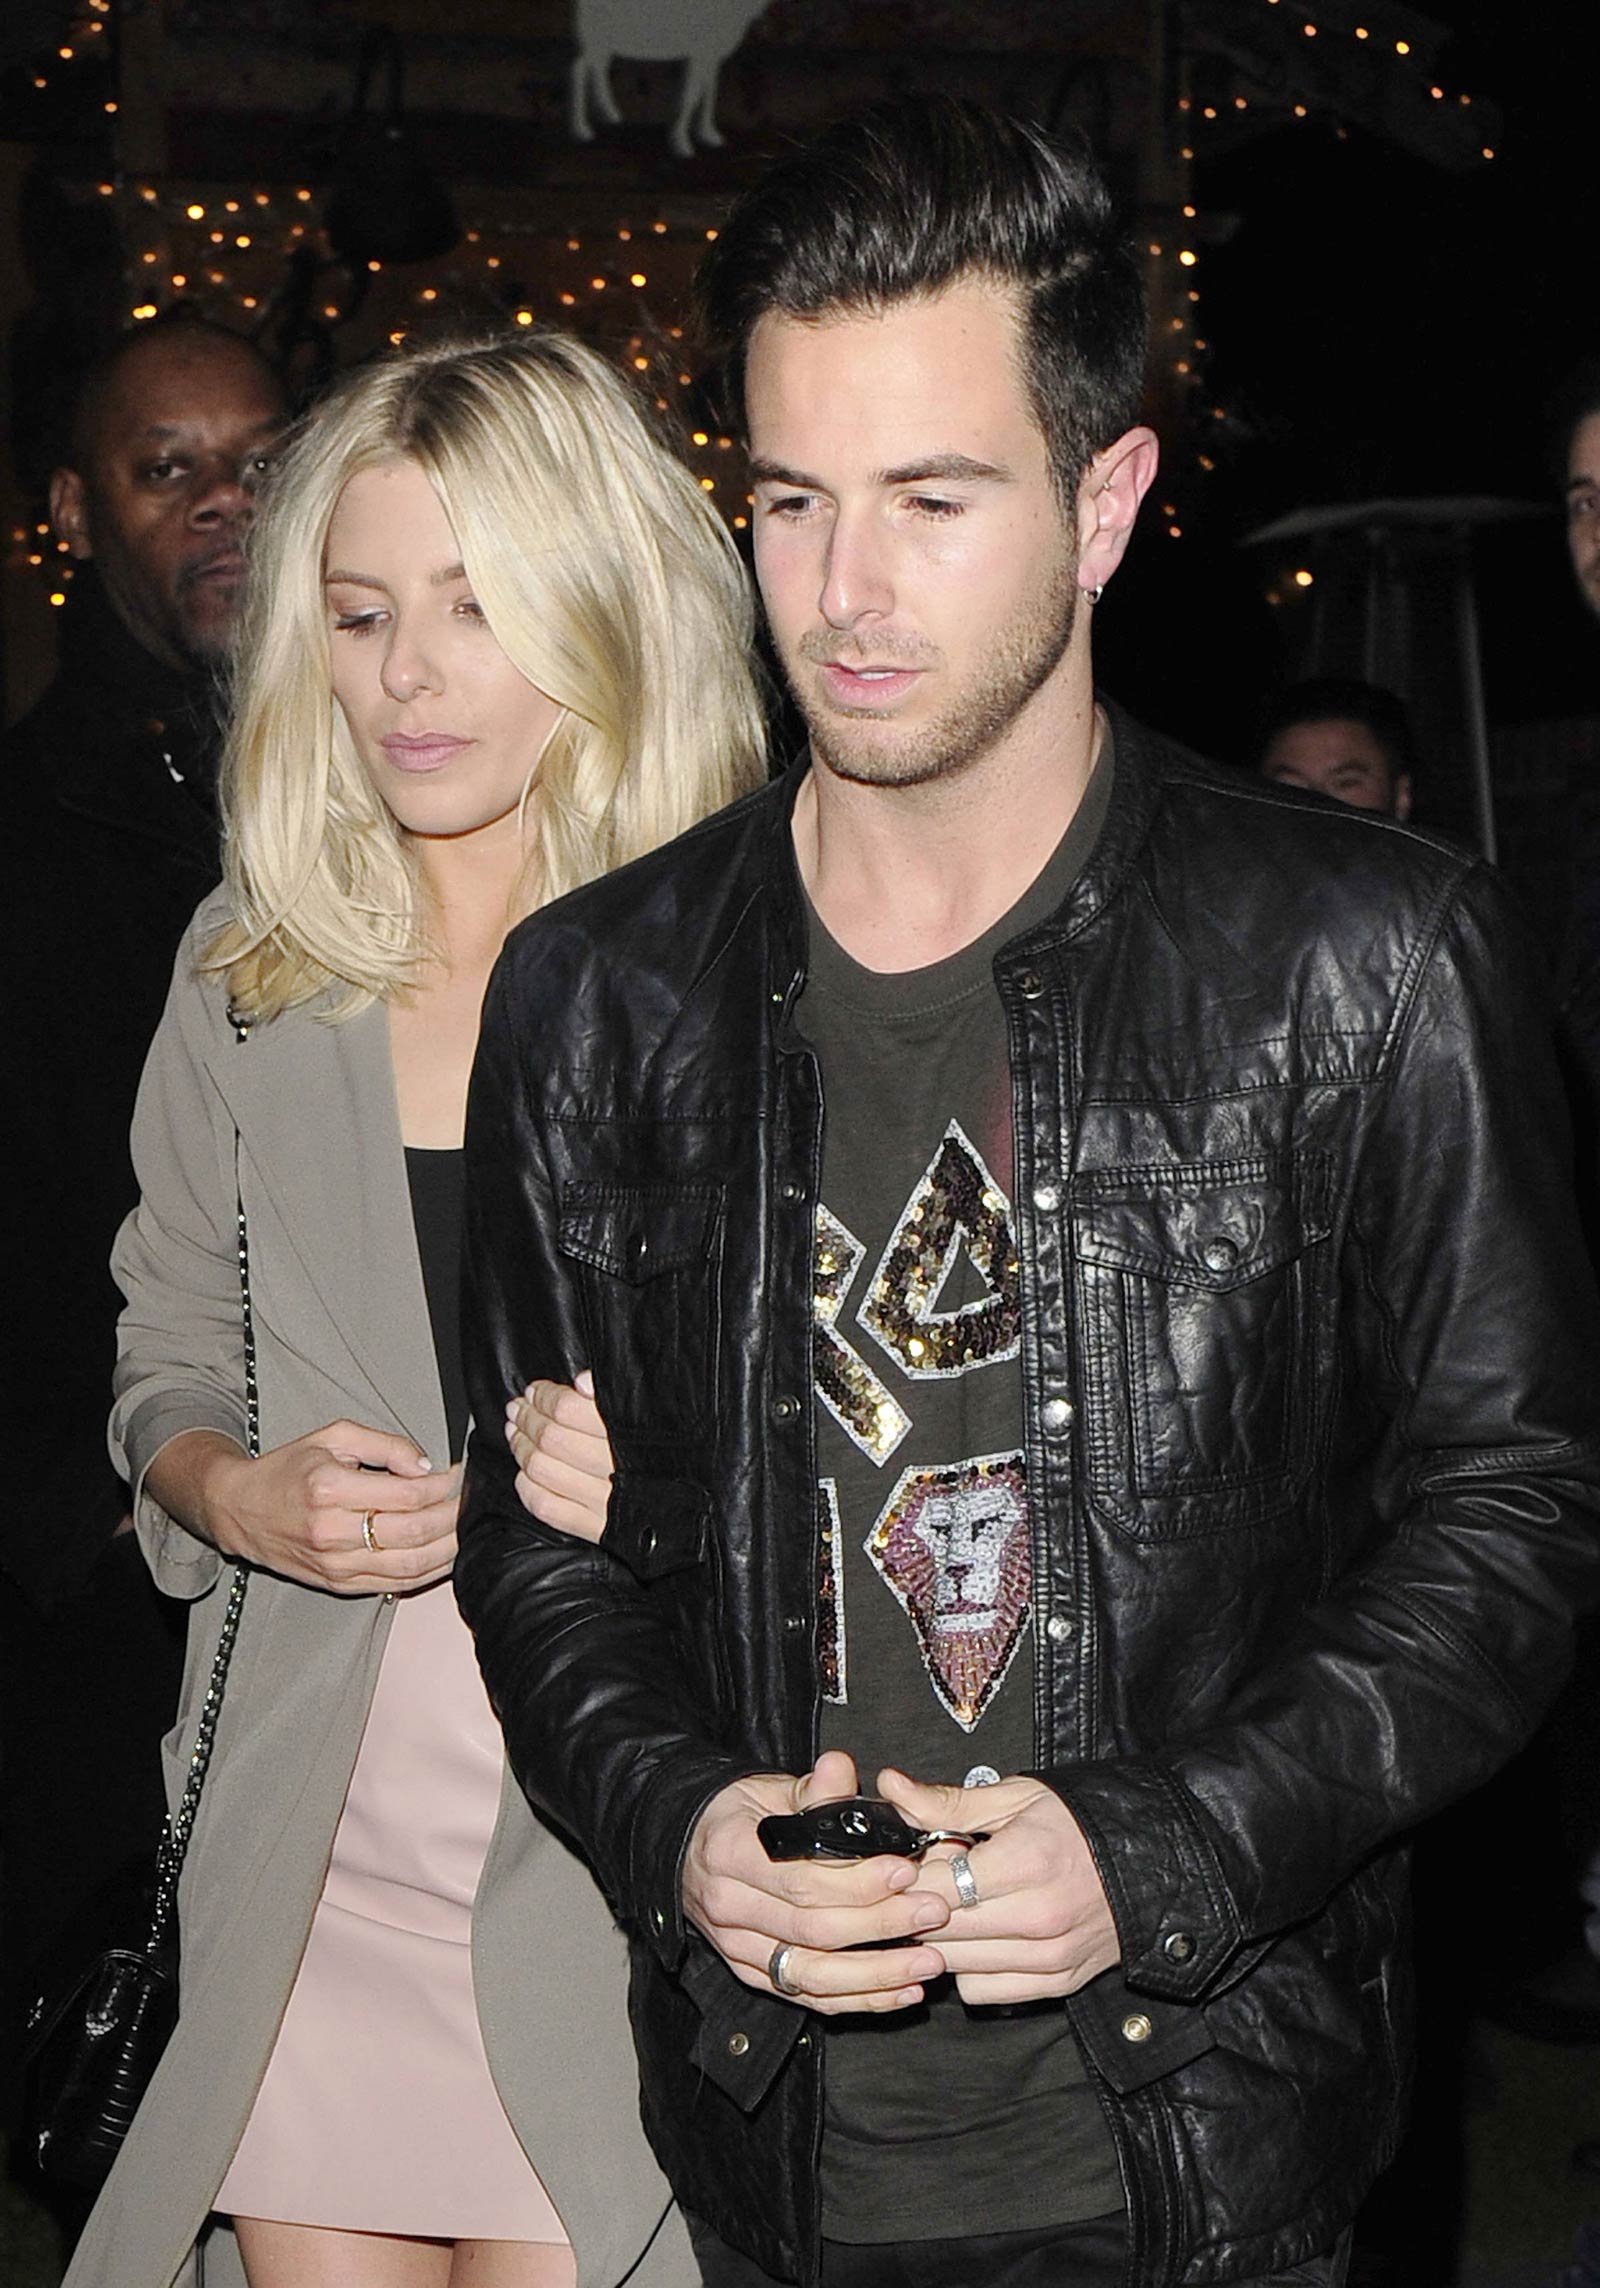 Mollie King night out in London